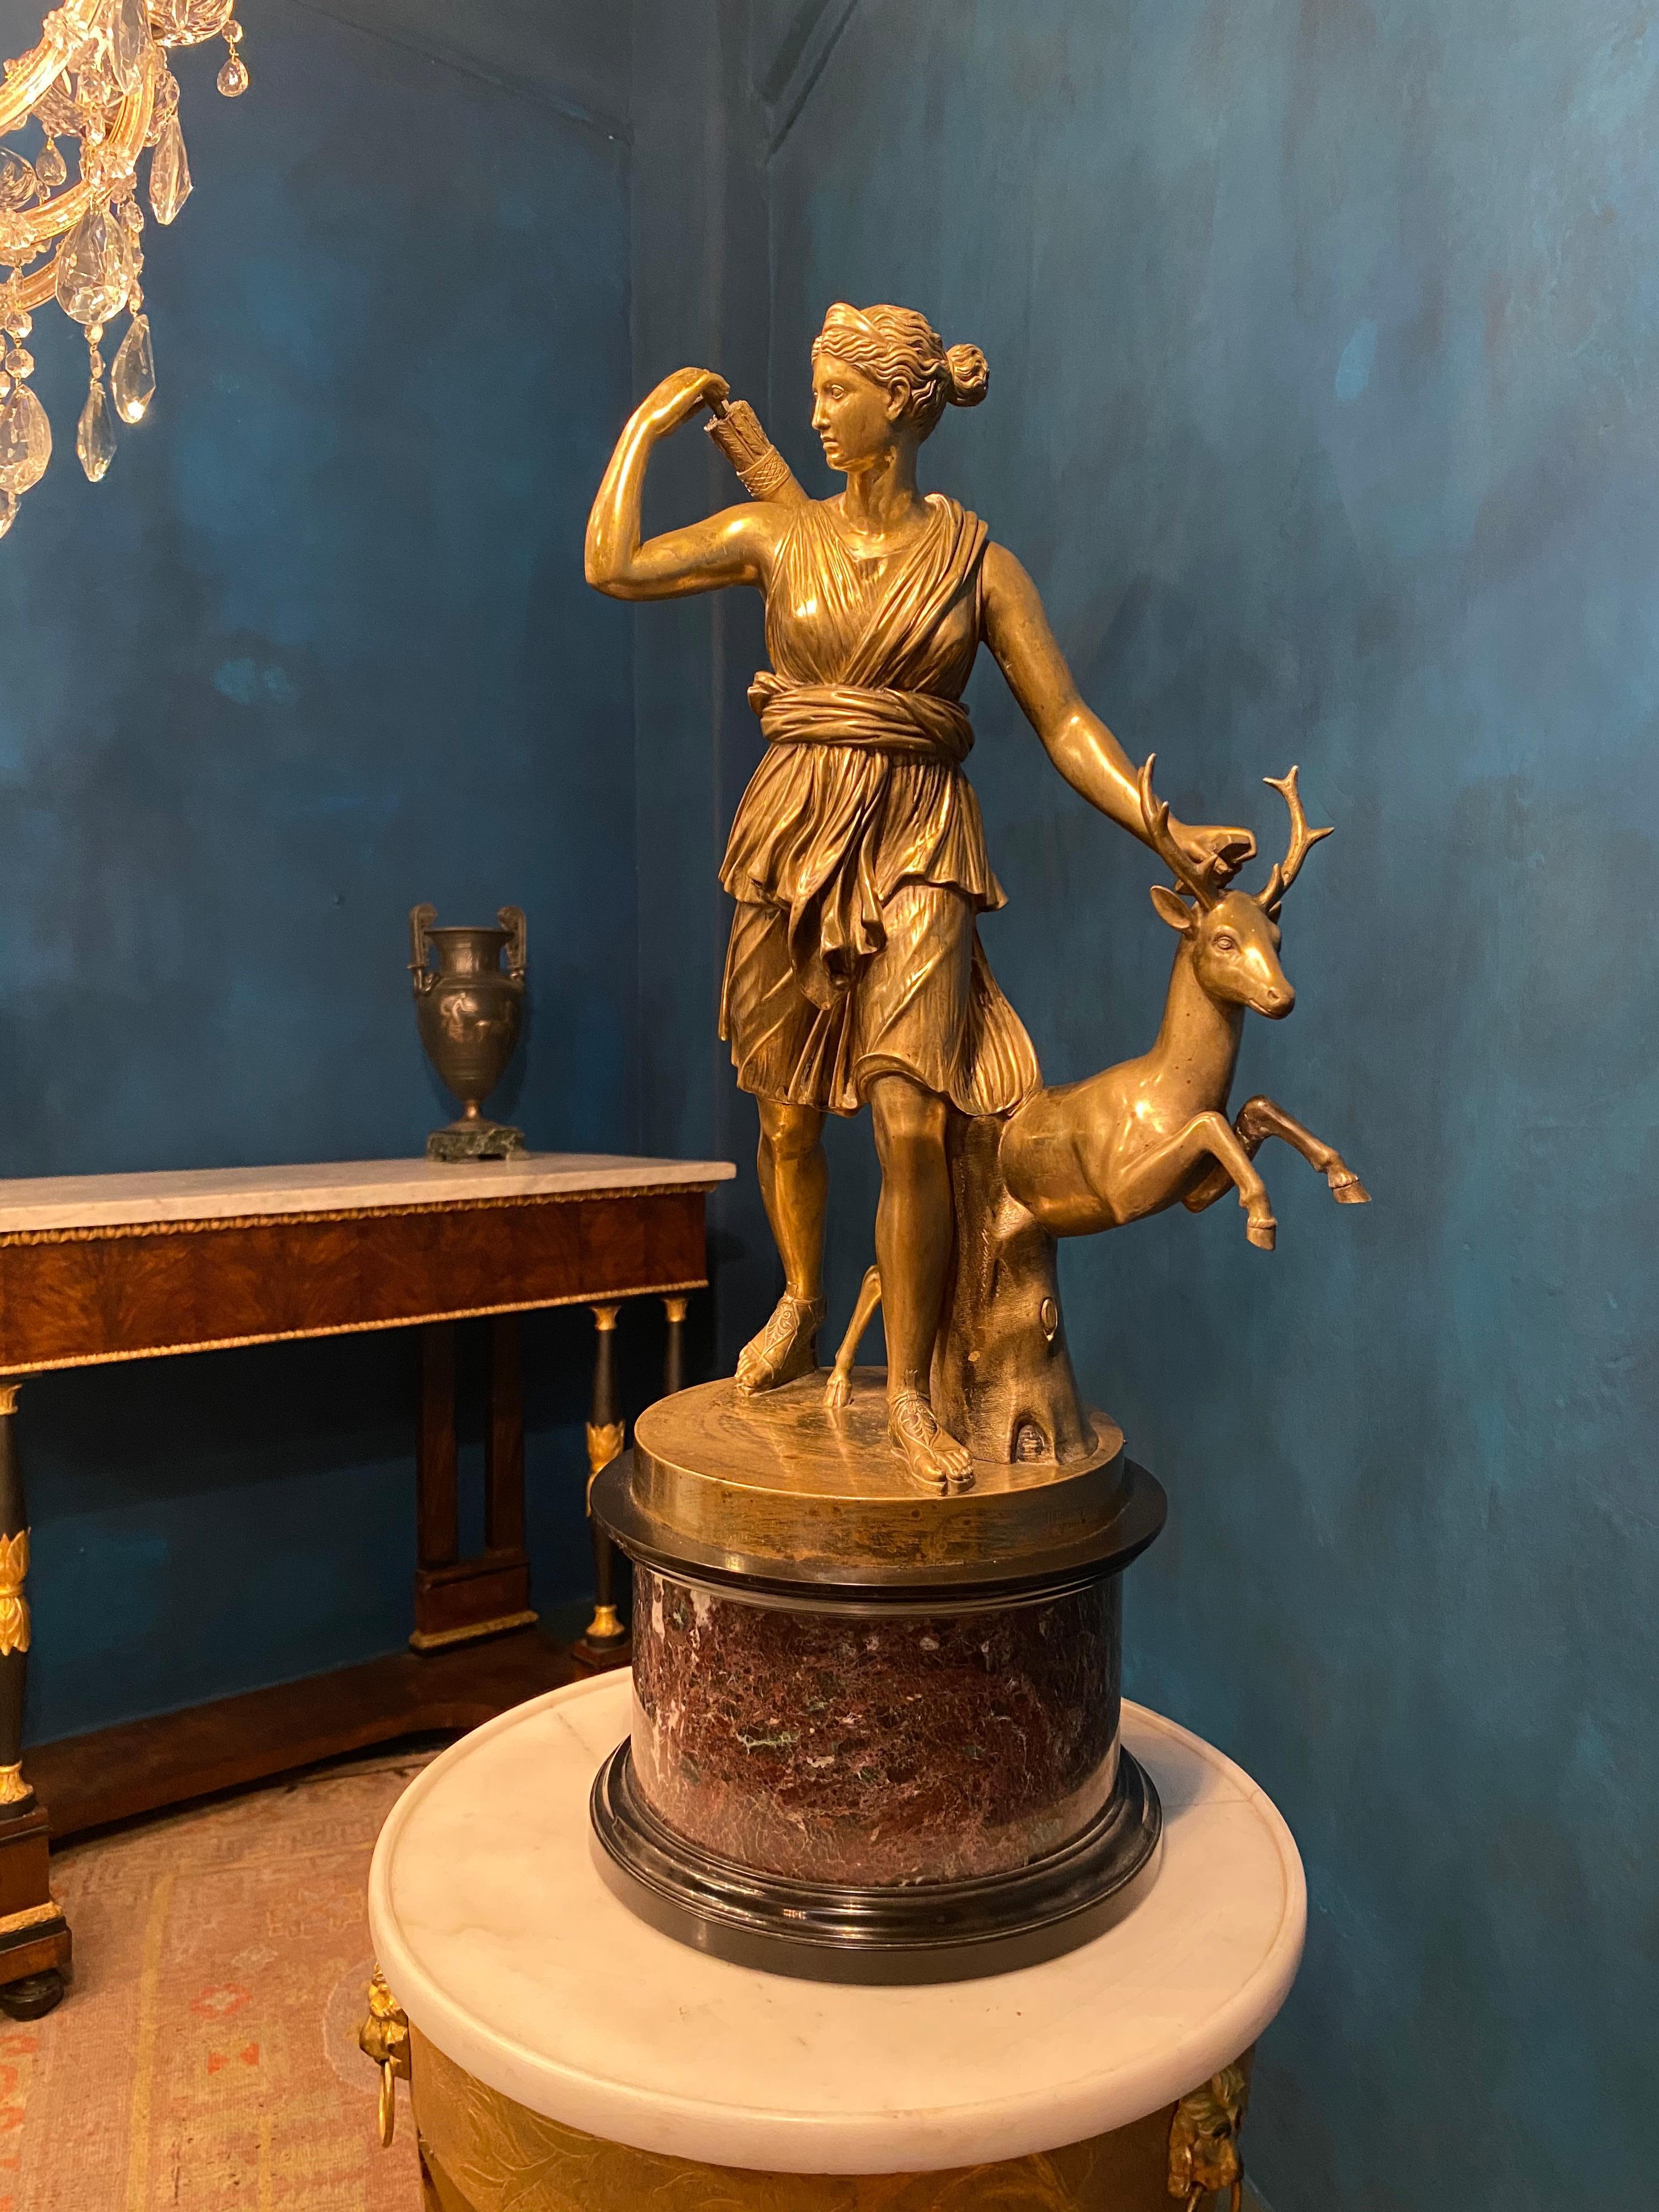 Grand Tour Fine Group of Sculpture in Bronze after a Louvre  Diana of Versailles or Artemis, Goddess of the Hunt.
Diana is represented at the hunt, hastening forward, as if in pursuit of game. She looks toward the right and with raised right arm is